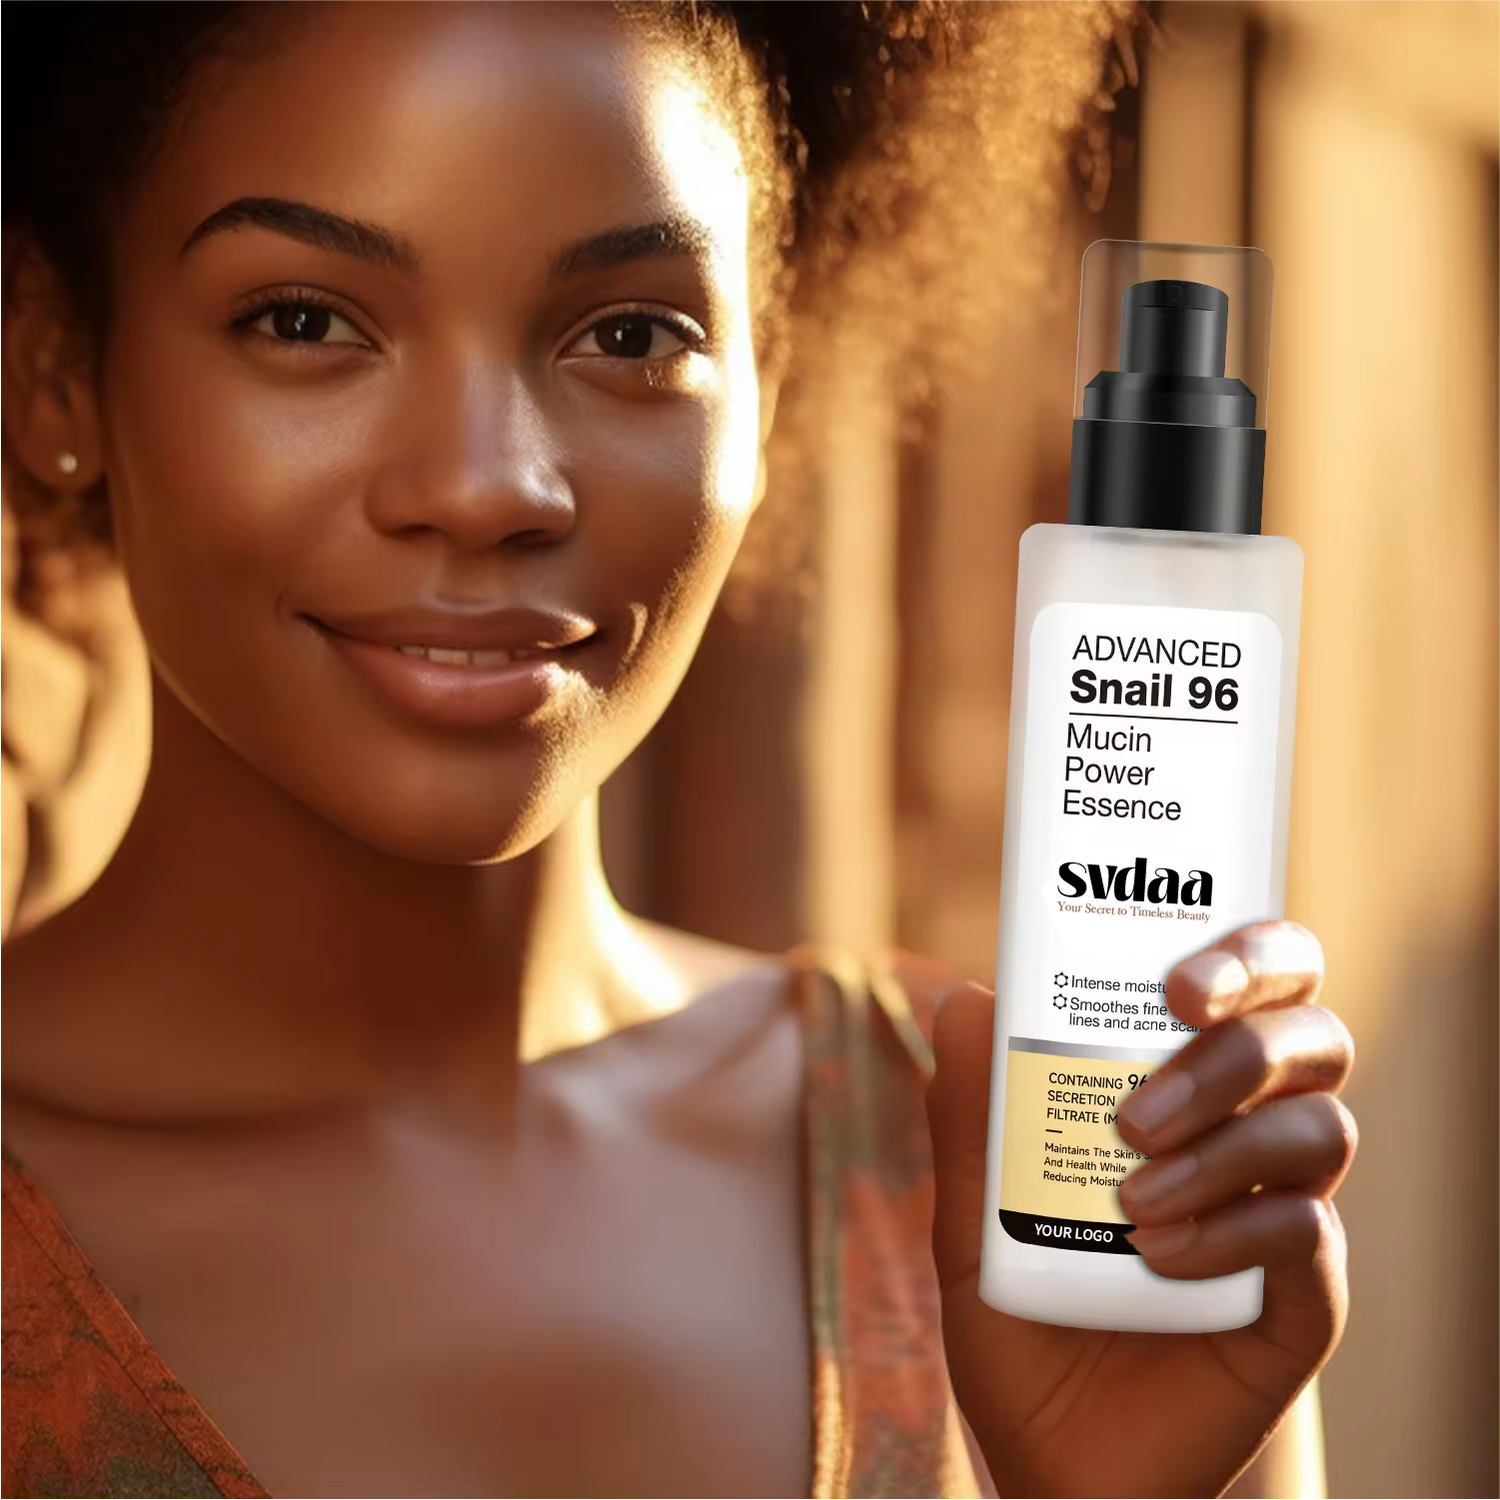 Discover the Beauty of Natural Skincare with Svdaa